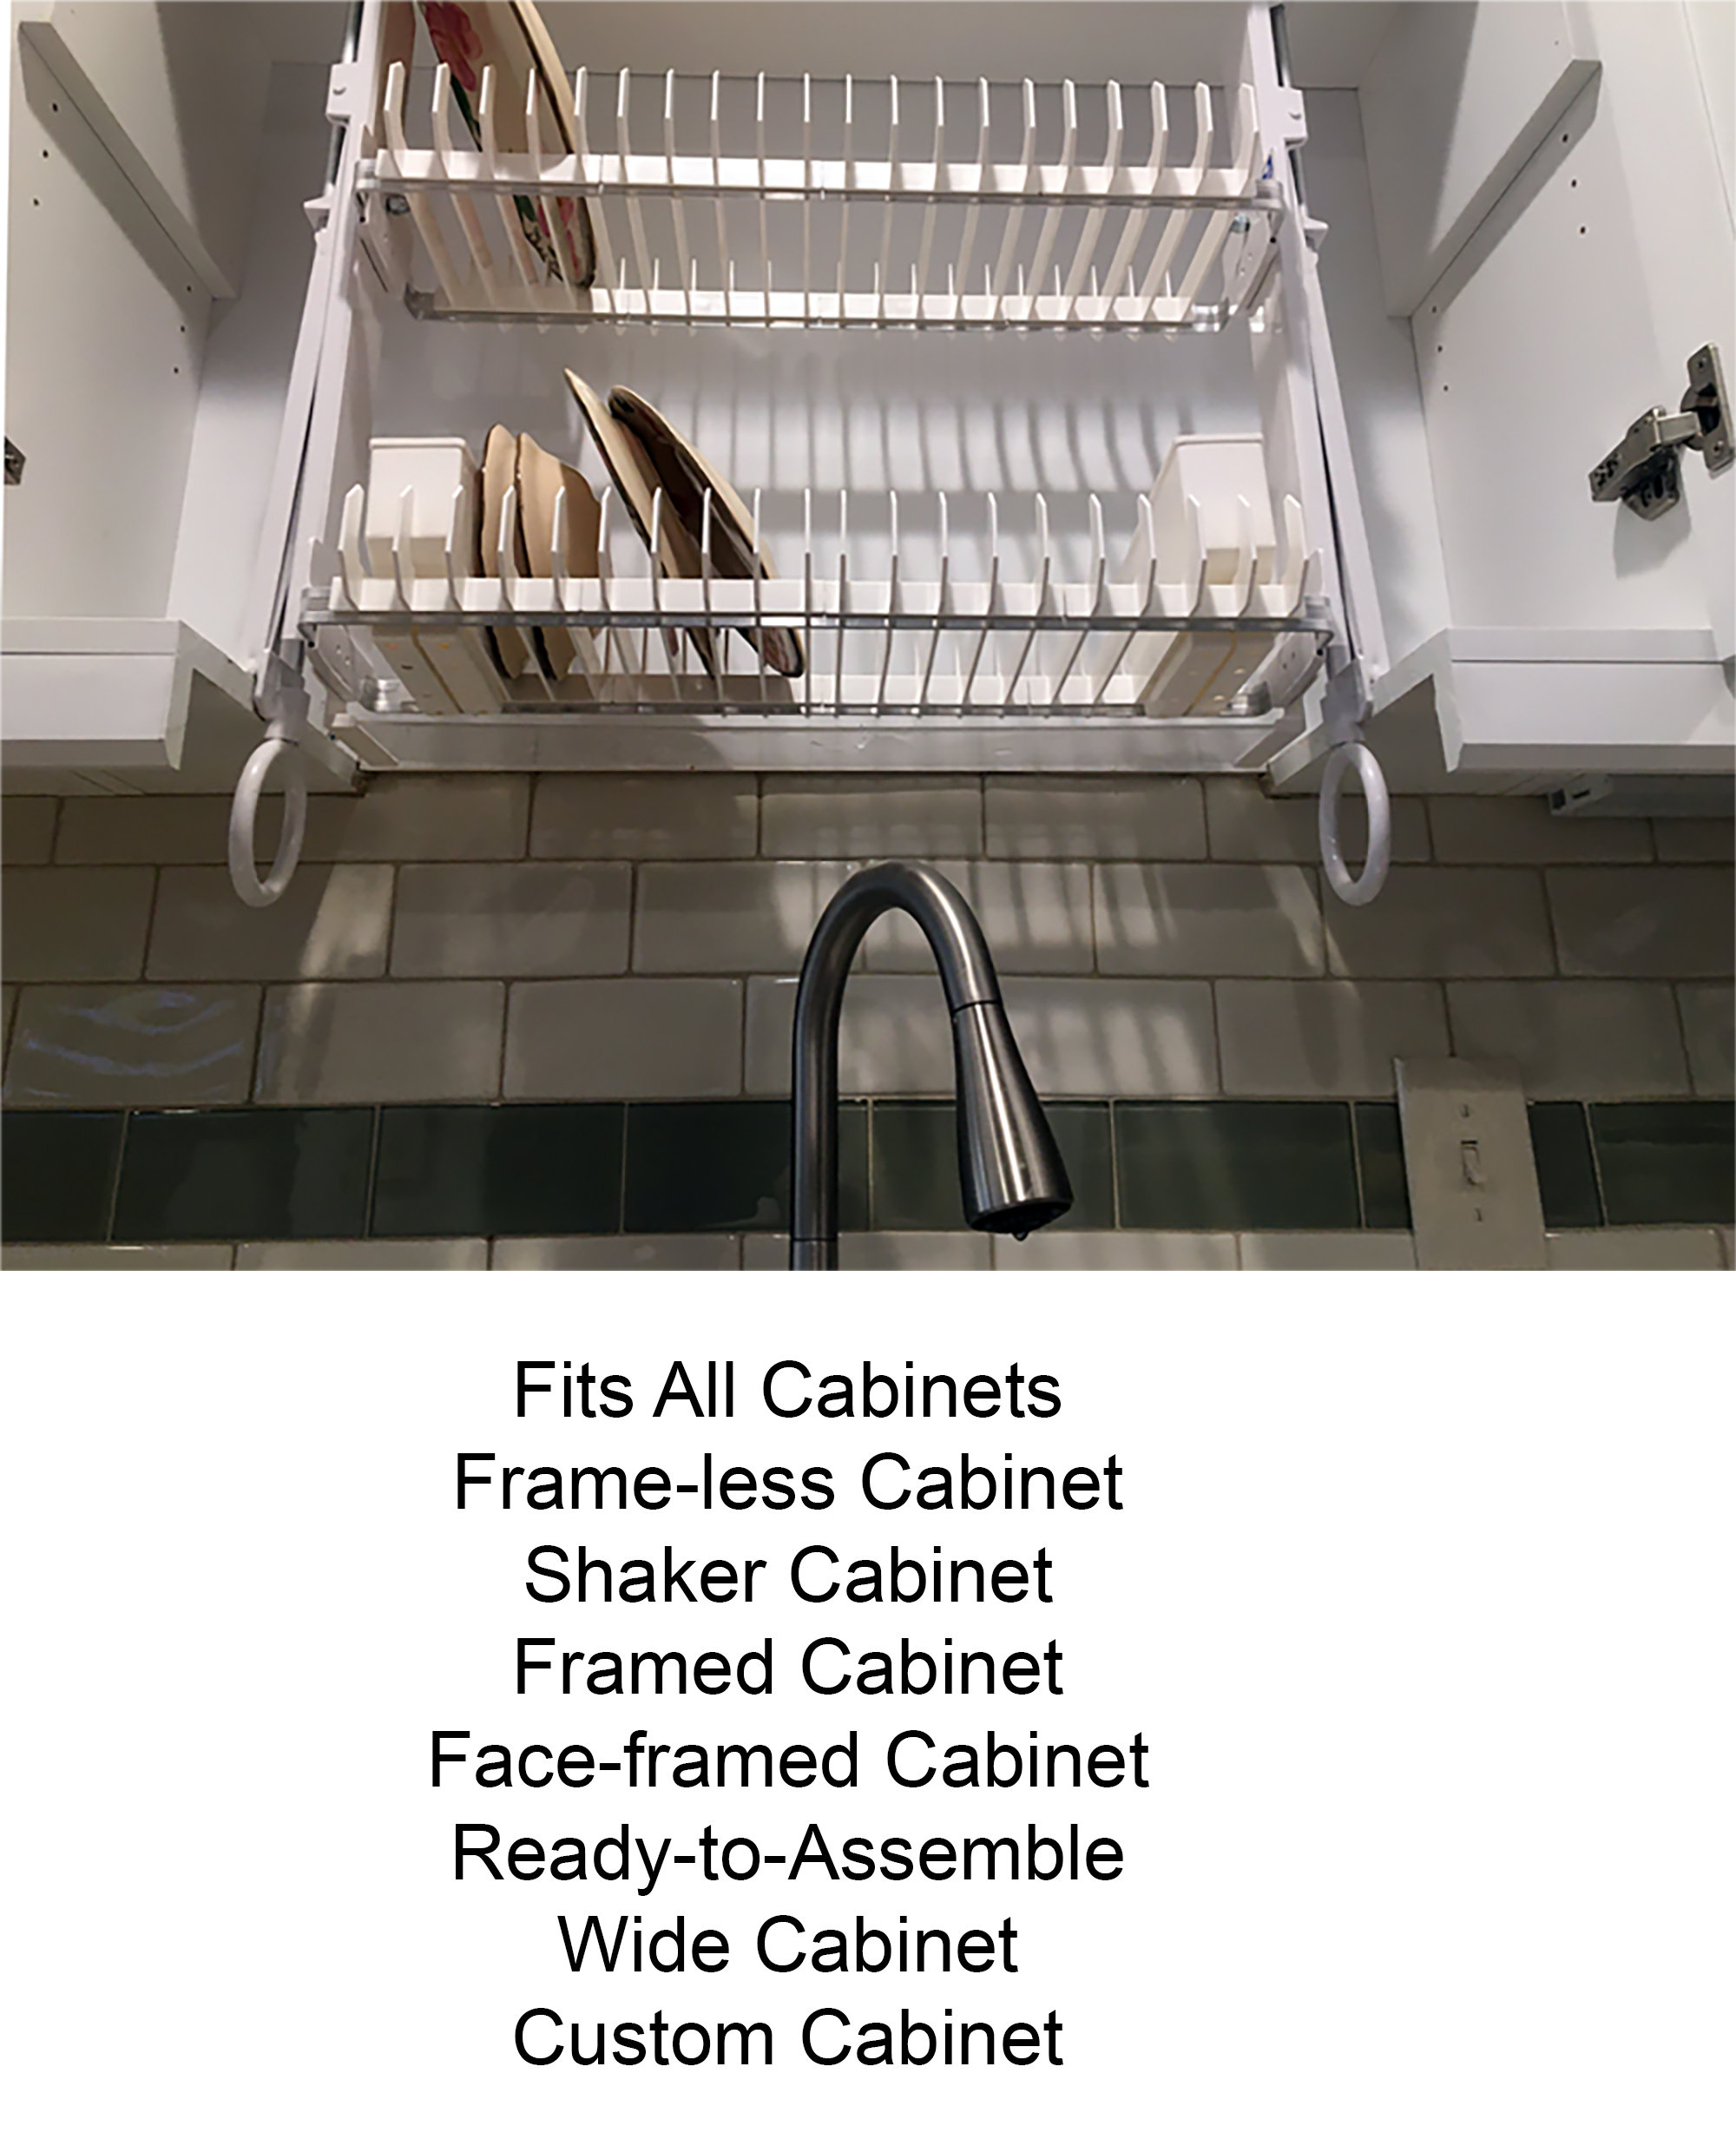 French Country Dish Drying Rack - MAKEUP FOR MATURE SKIN